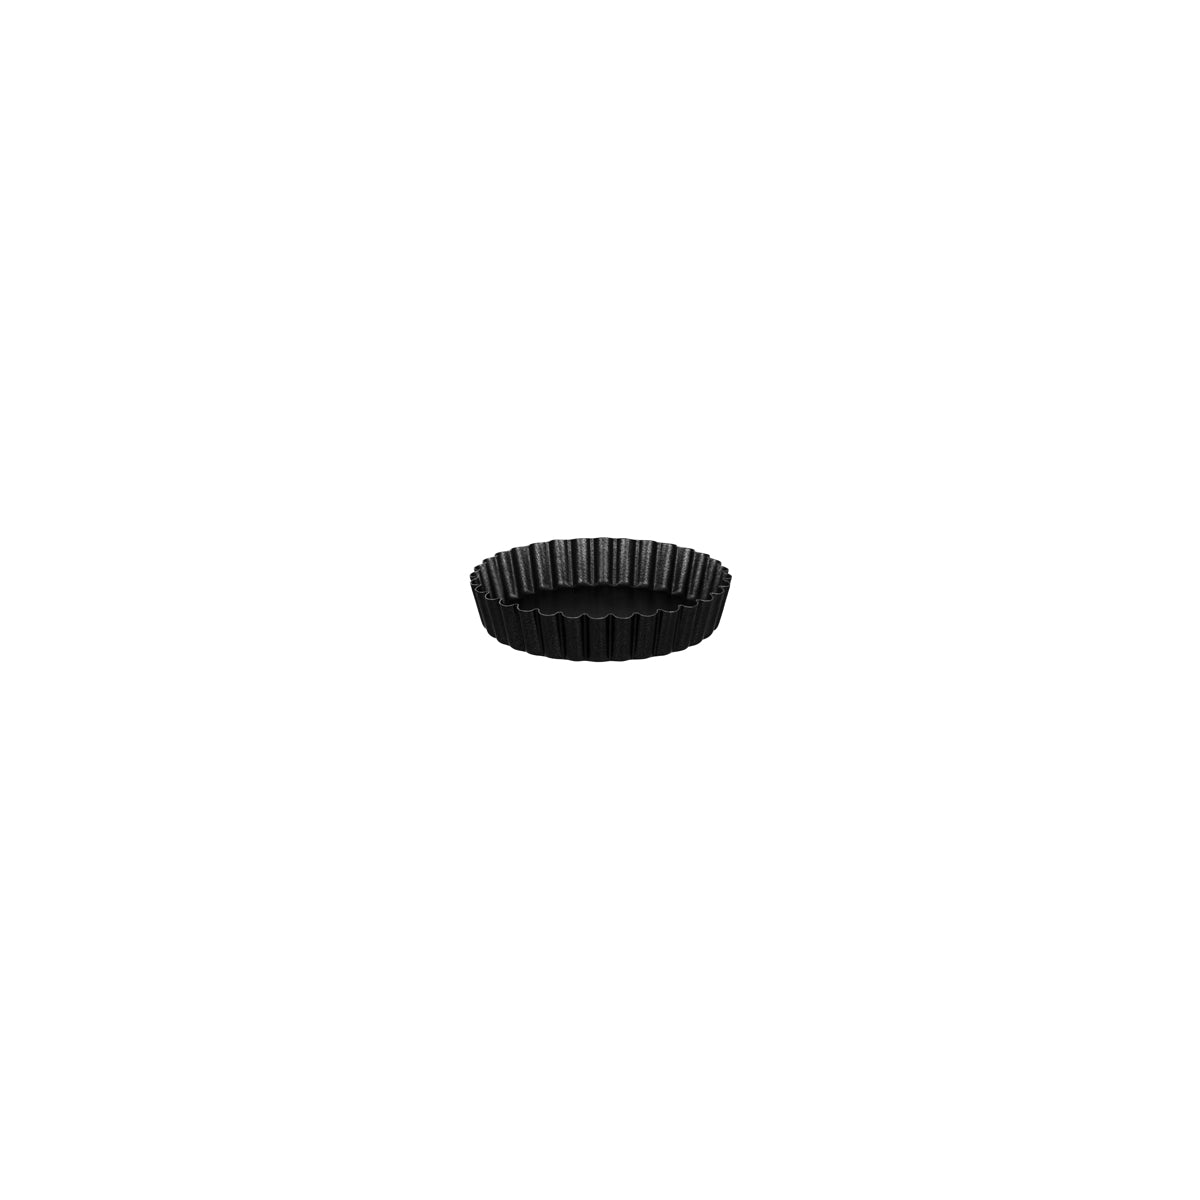 67417 Guery Tart Mould 36 Ribs Round Fluted Non-Stick 95x18mm Tomkin Australia Hospitality Supplies